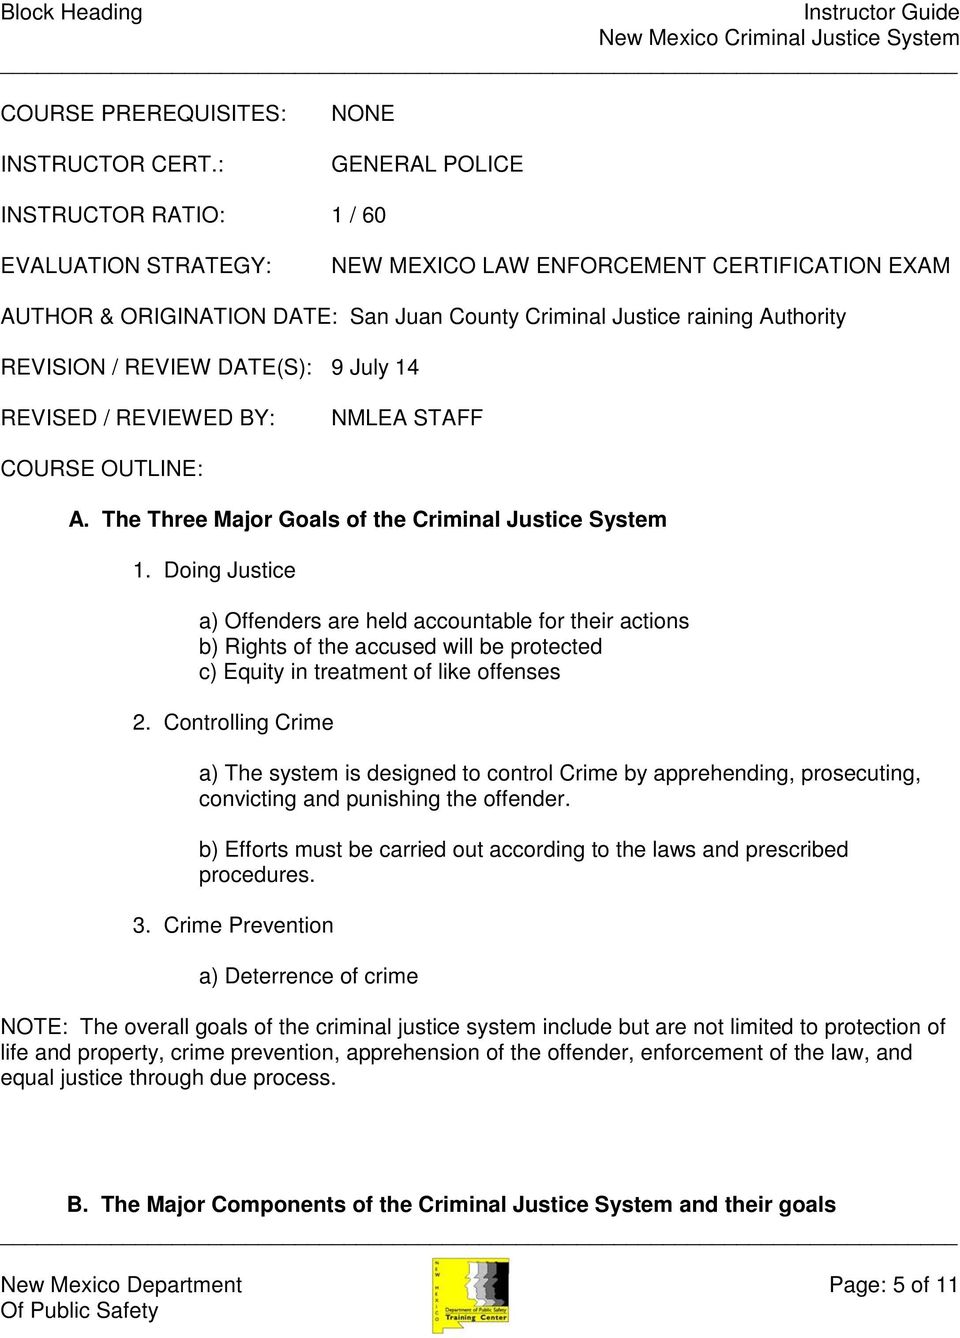 REVISION / REVIEW DATE(S): 9 July 14 REVISED / REVIEWED BY: NMLEA STAFF COURSE OUTLINE: A. The Three Major Goals of the Criminal Justice System 1.